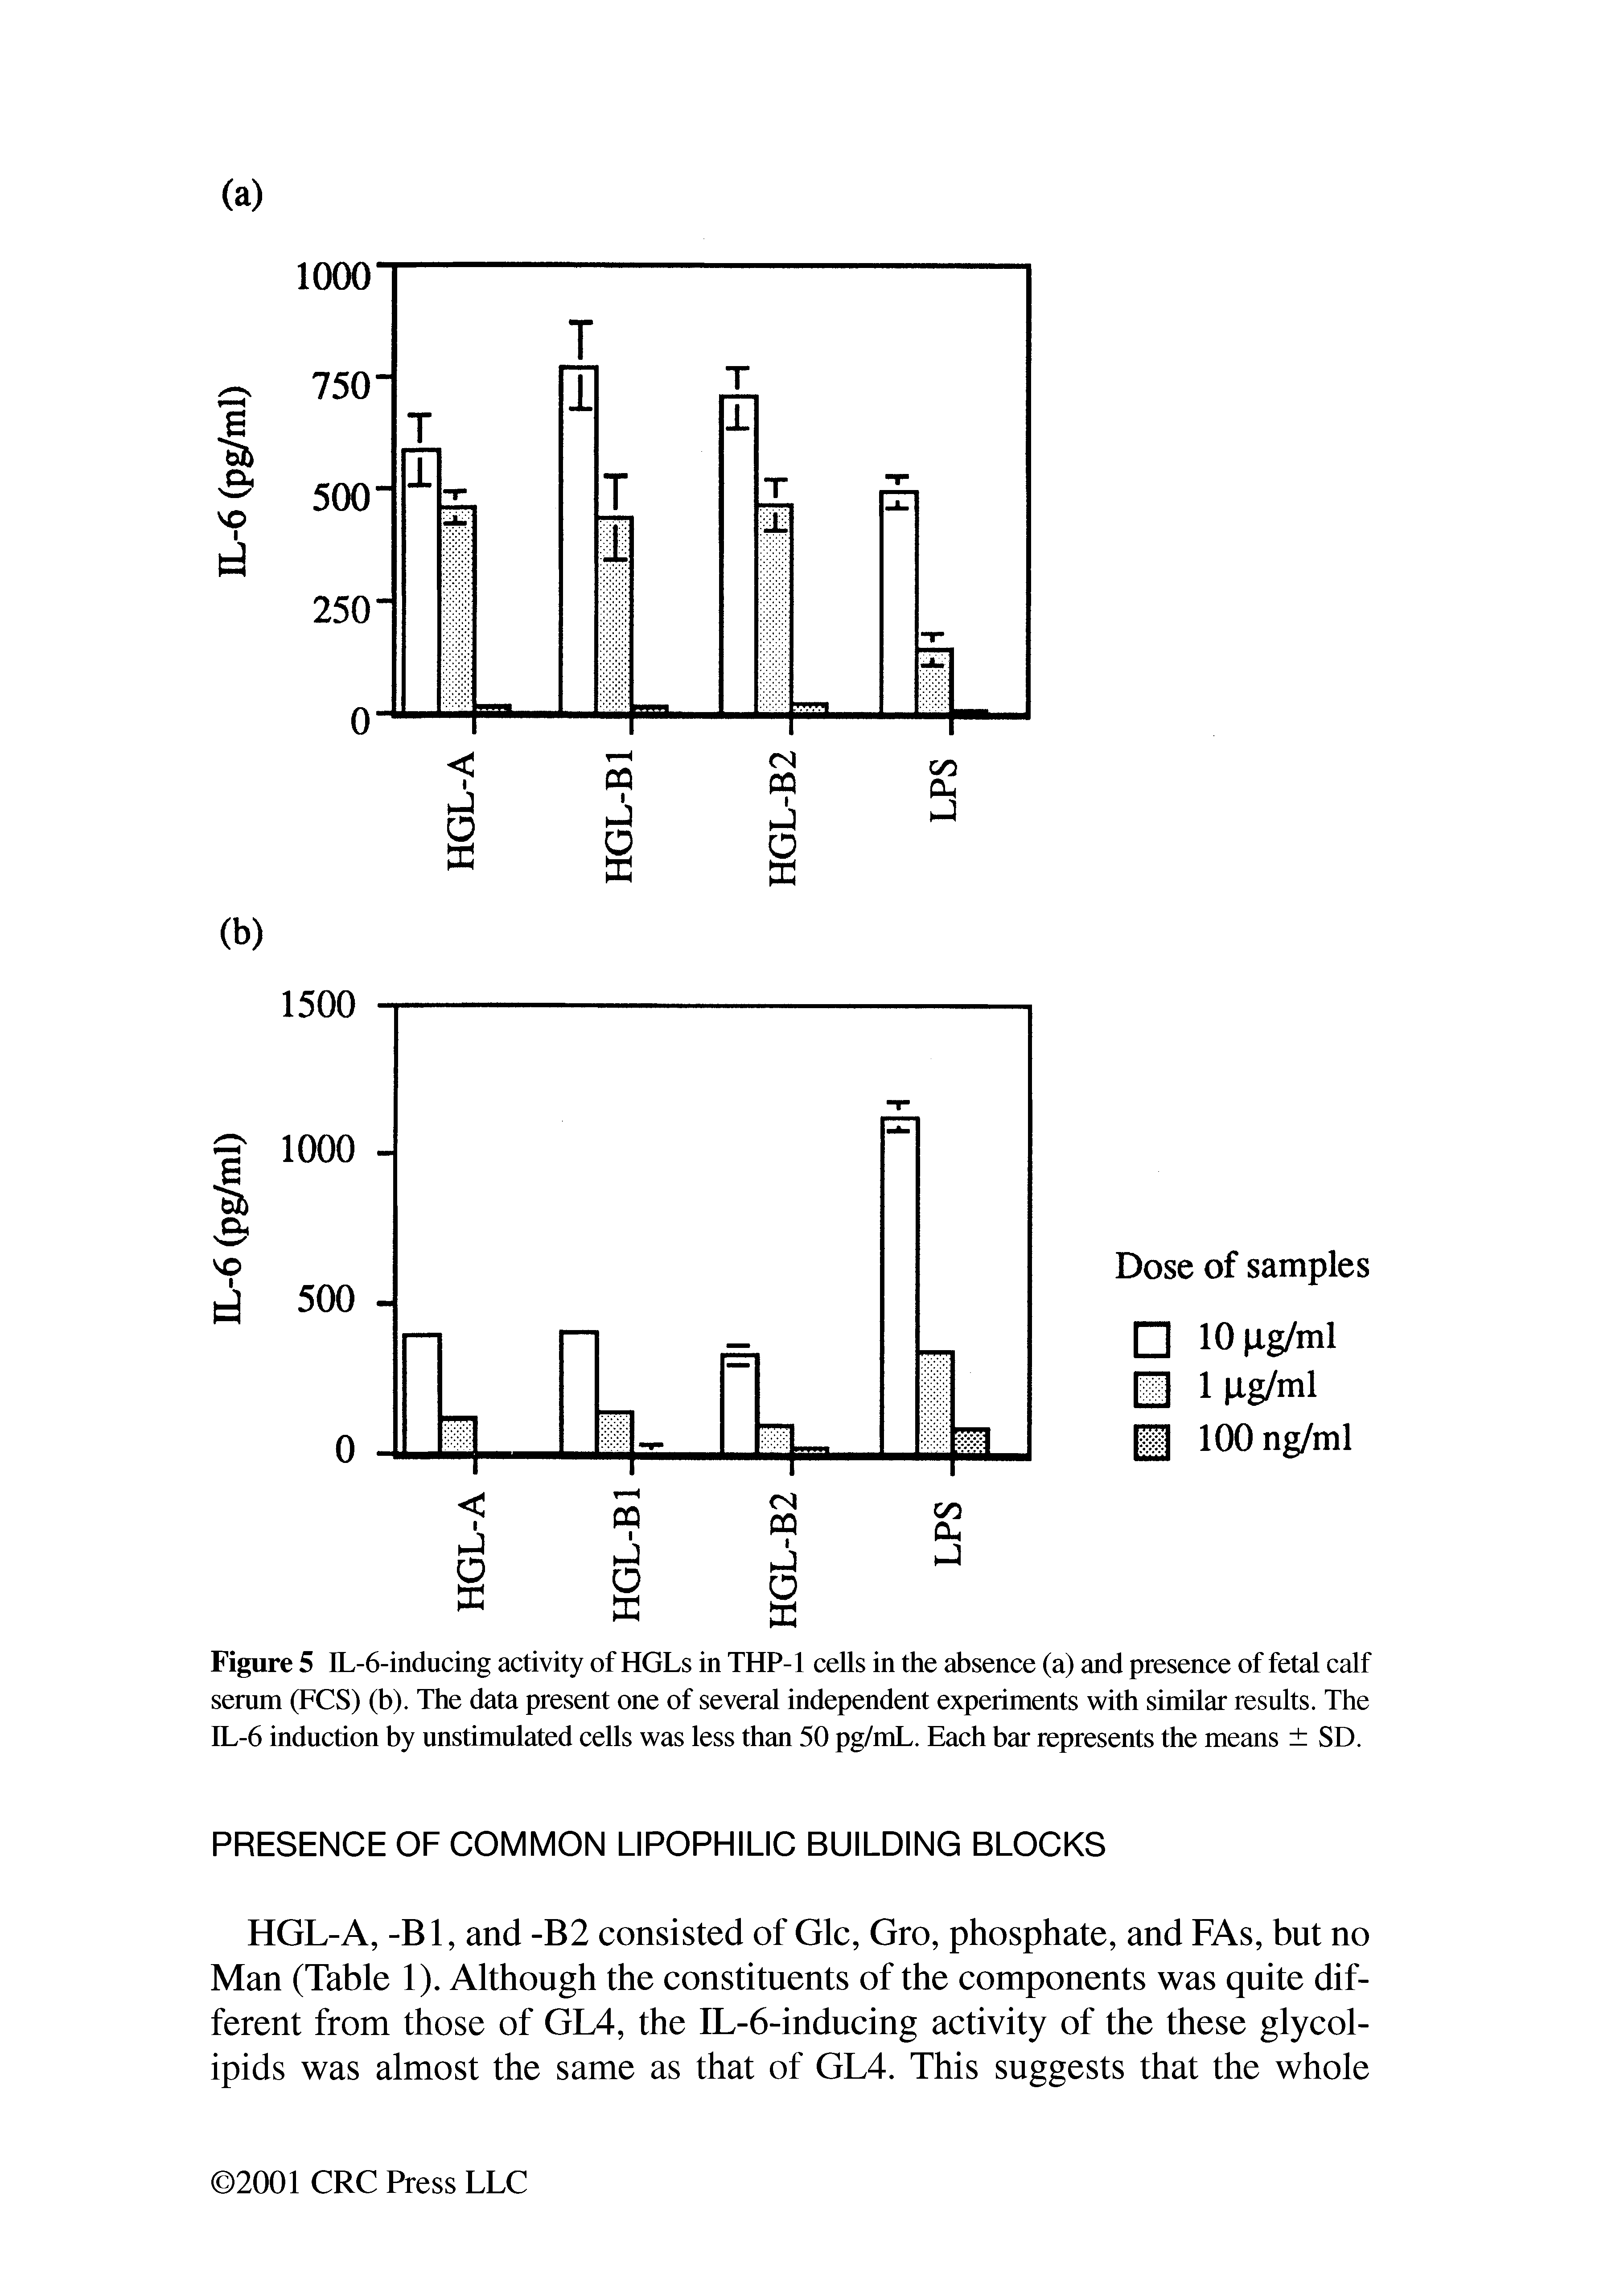 Figure 5 IL-6-inducing activity of HGLs in THP-1 cells in the absence (a) and presence of fetal calf serum (FCS) (b). The data present one of several independent experiments with similar results. The IL-6 induetion by unstimulated eells was less than 50 pg/mL. Eaeh bar represents the means SD.